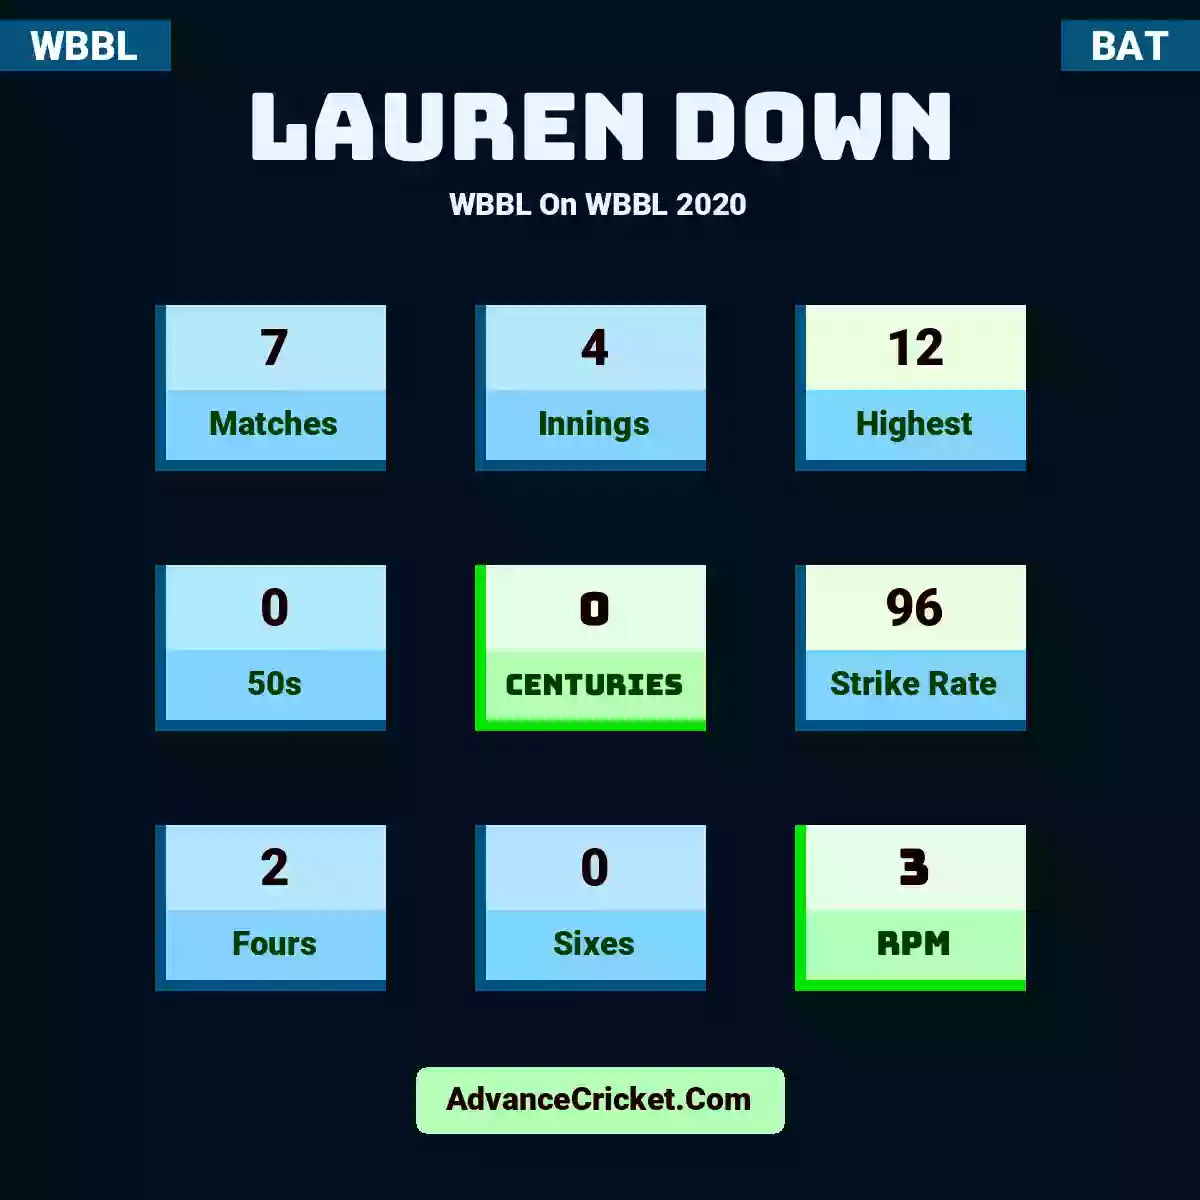 Lauren Down WBBL  On WBBL 2020, Lauren Down played 7 matches, scored 12 runs as highest, 0 half-centuries, and 0 centuries, with a strike rate of 96. L.Down hit 2 fours and 0 sixes, with an RPM of 3.